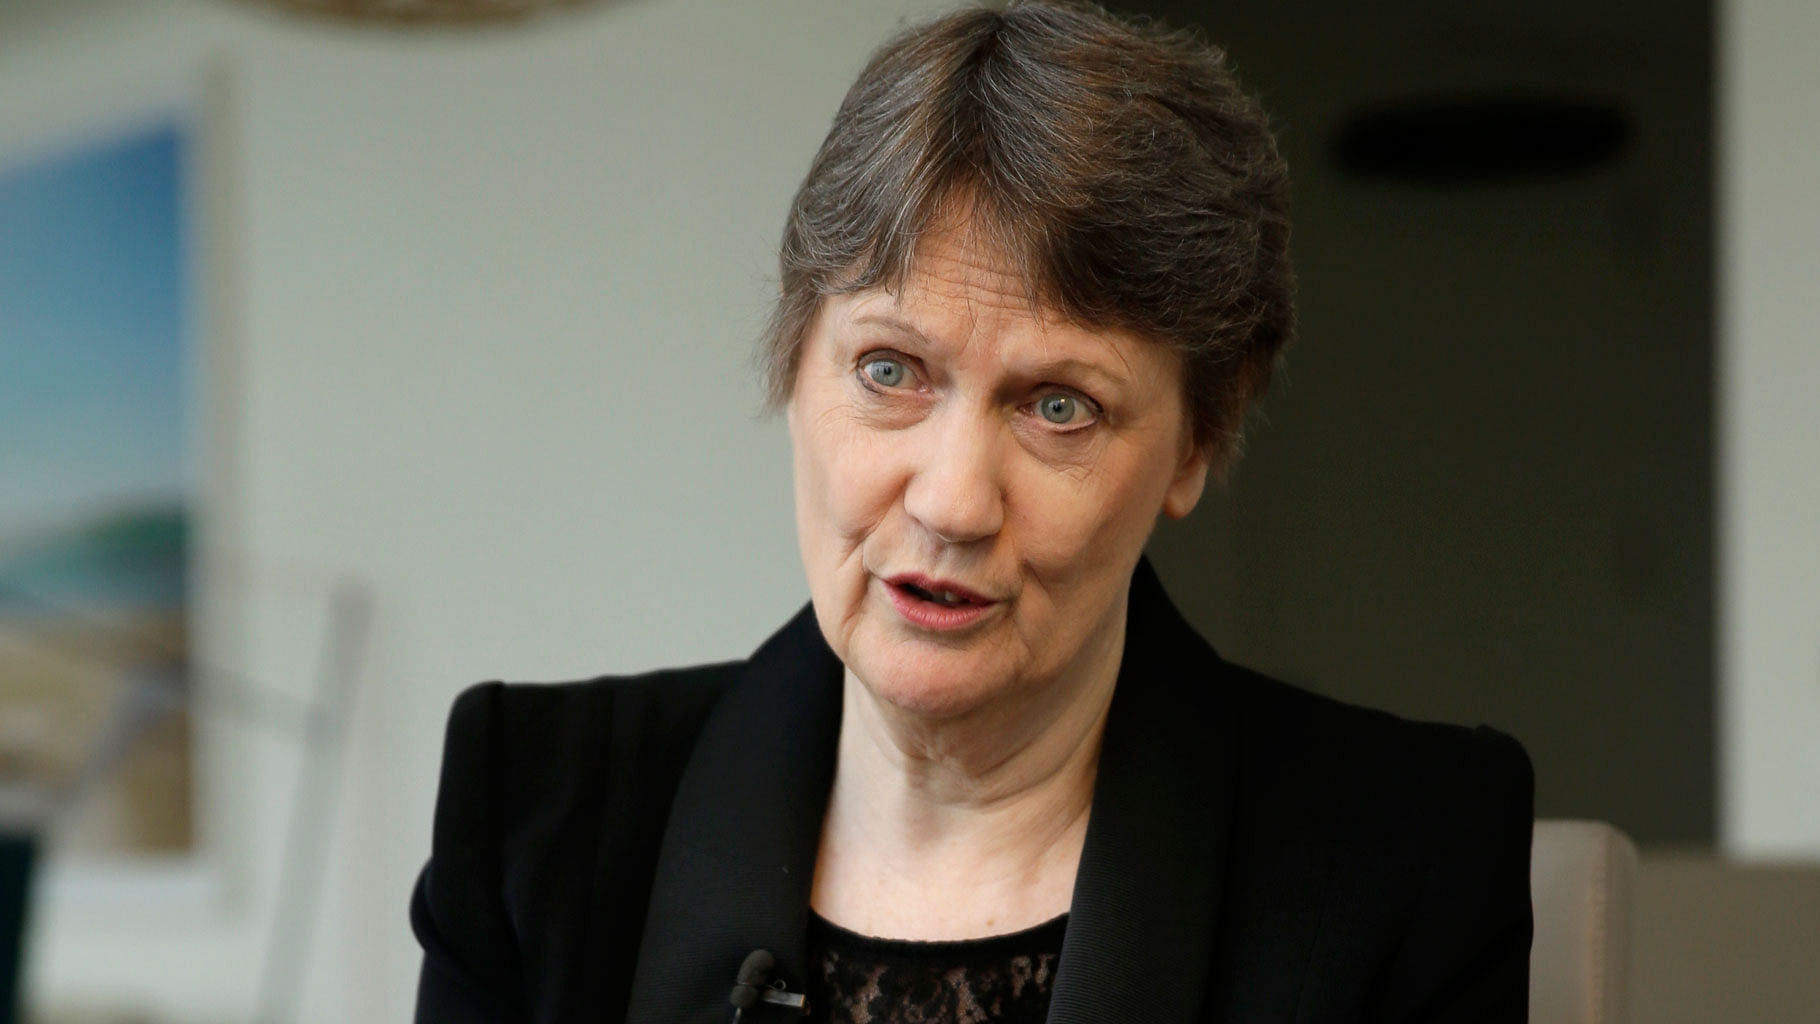 

Helen Clark has announced she is running for the top position at the UN with the backing of the New Zealand government. (Photo: AP)